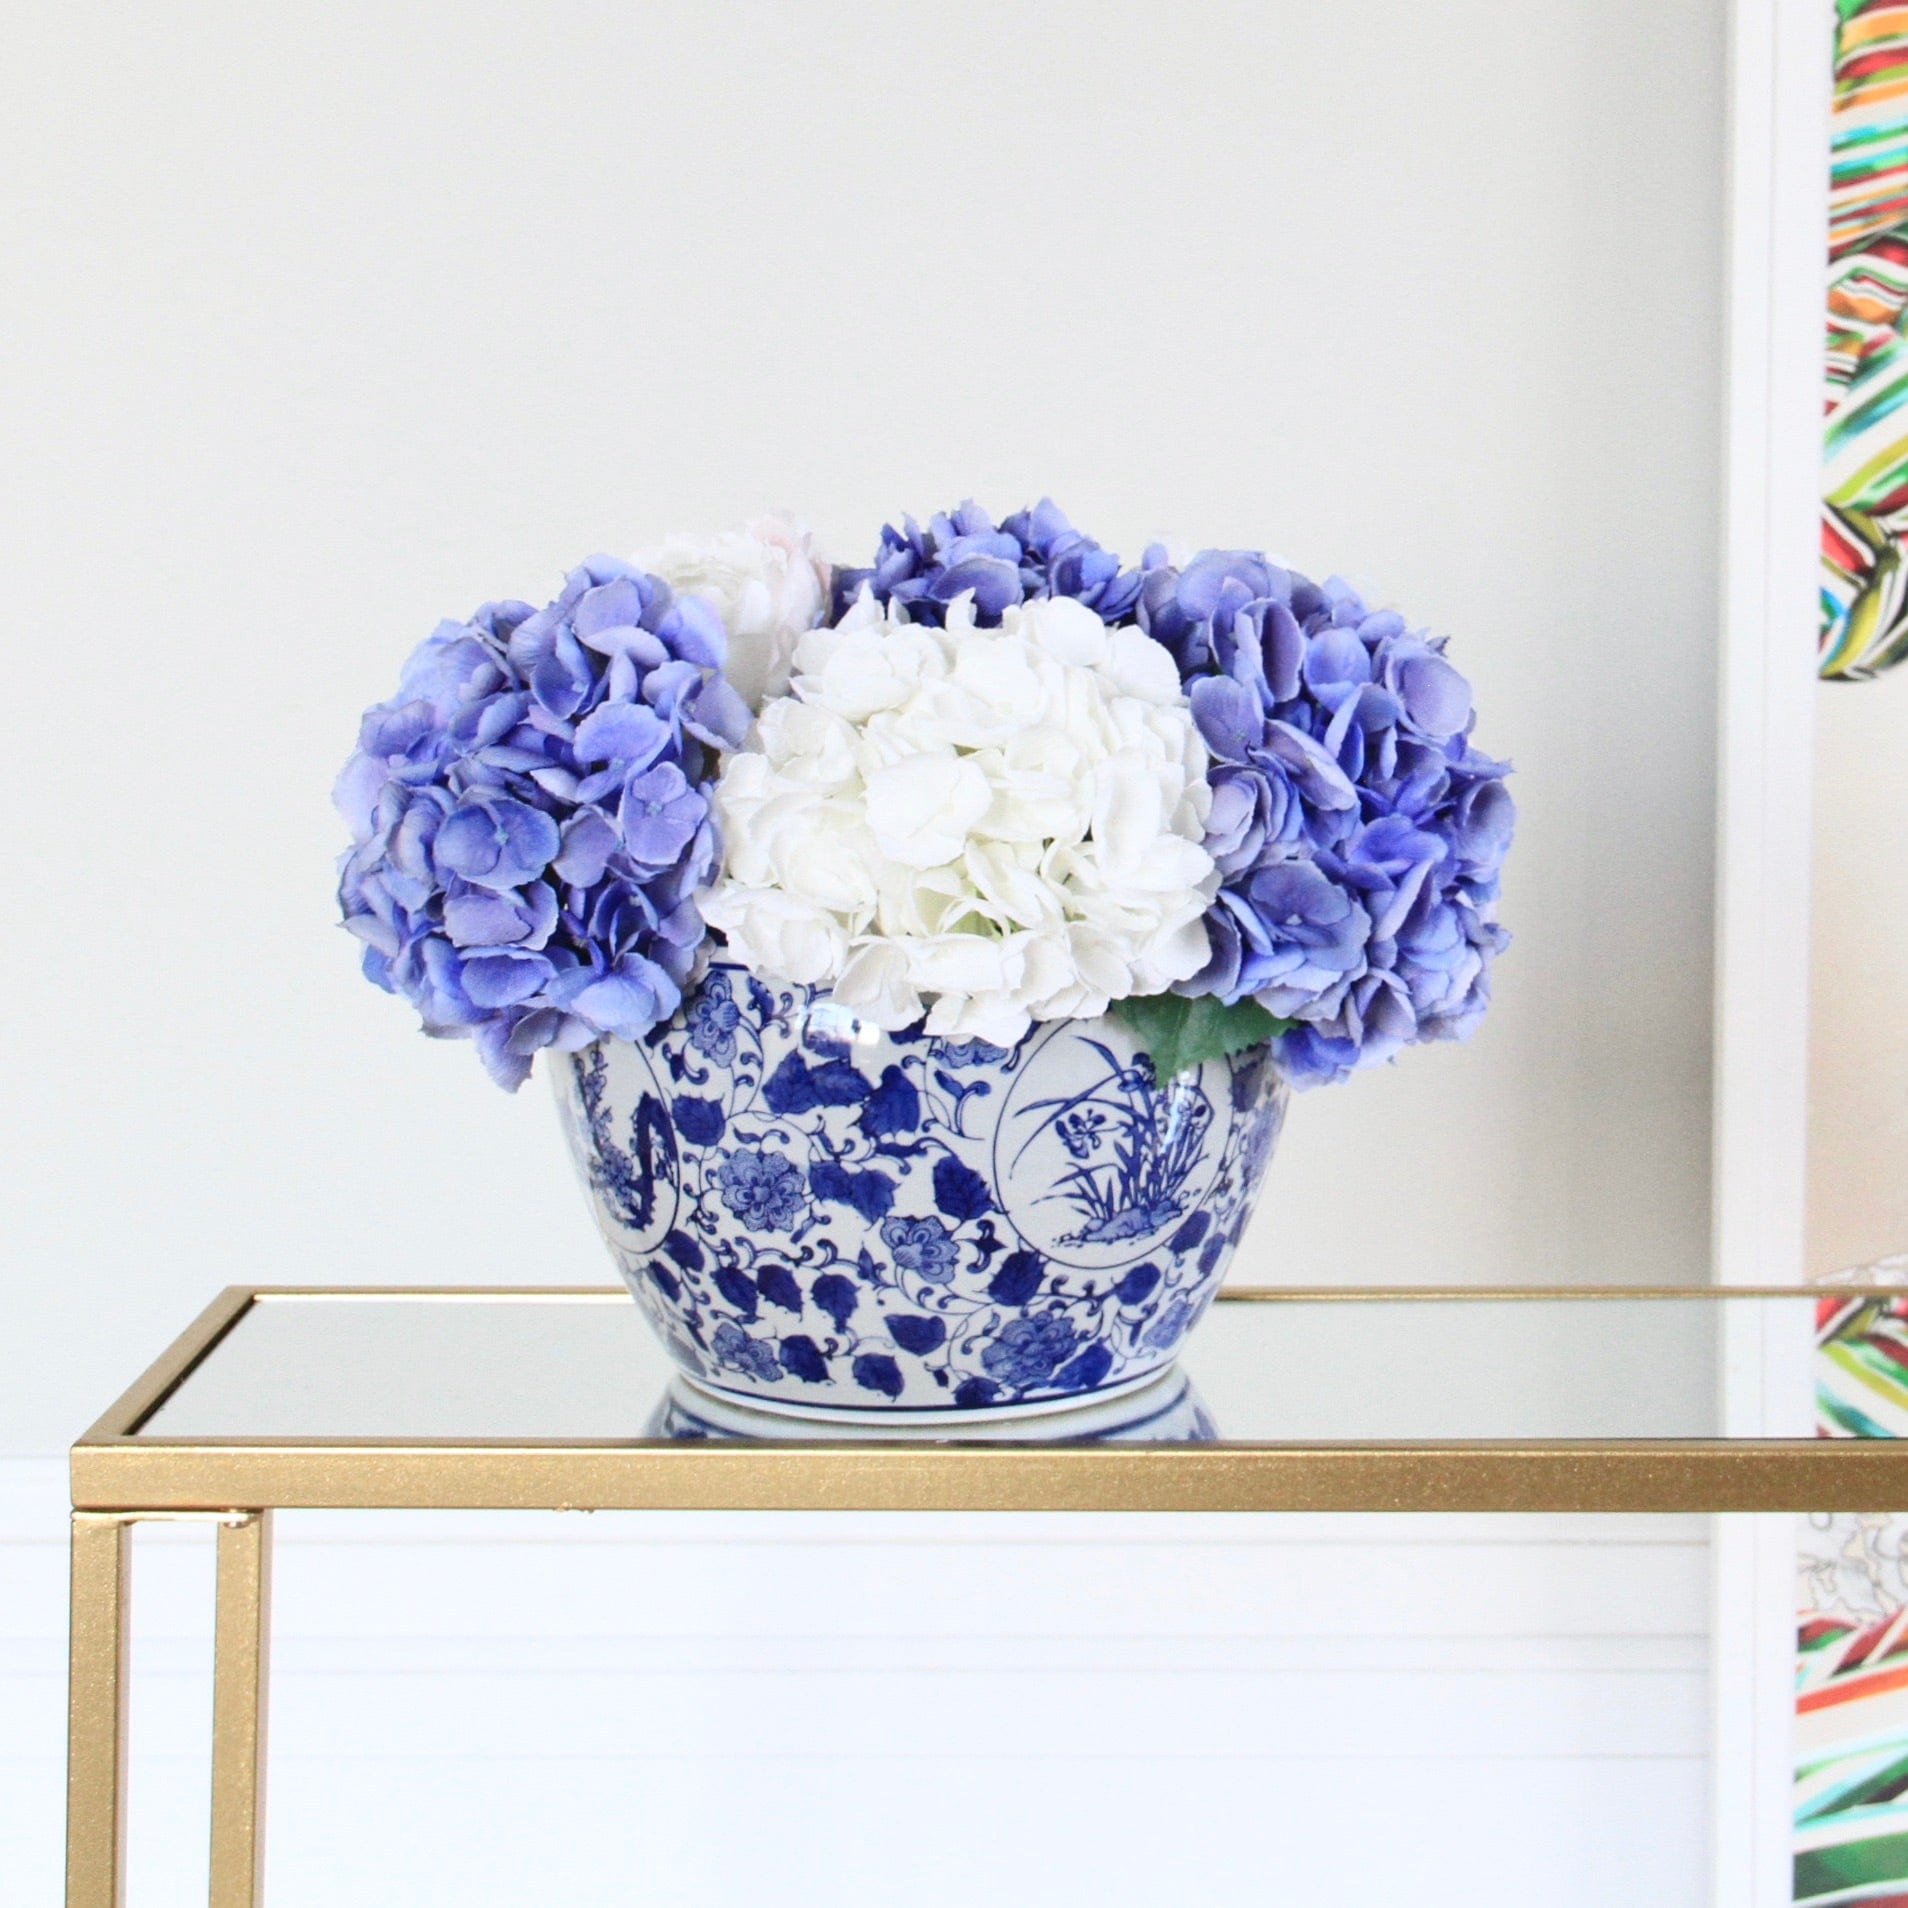 Artificial Flowers in Vase Stylish Vases Blue & White Floral Planter Home Decor and Accessories Amaranthine Blooms UK